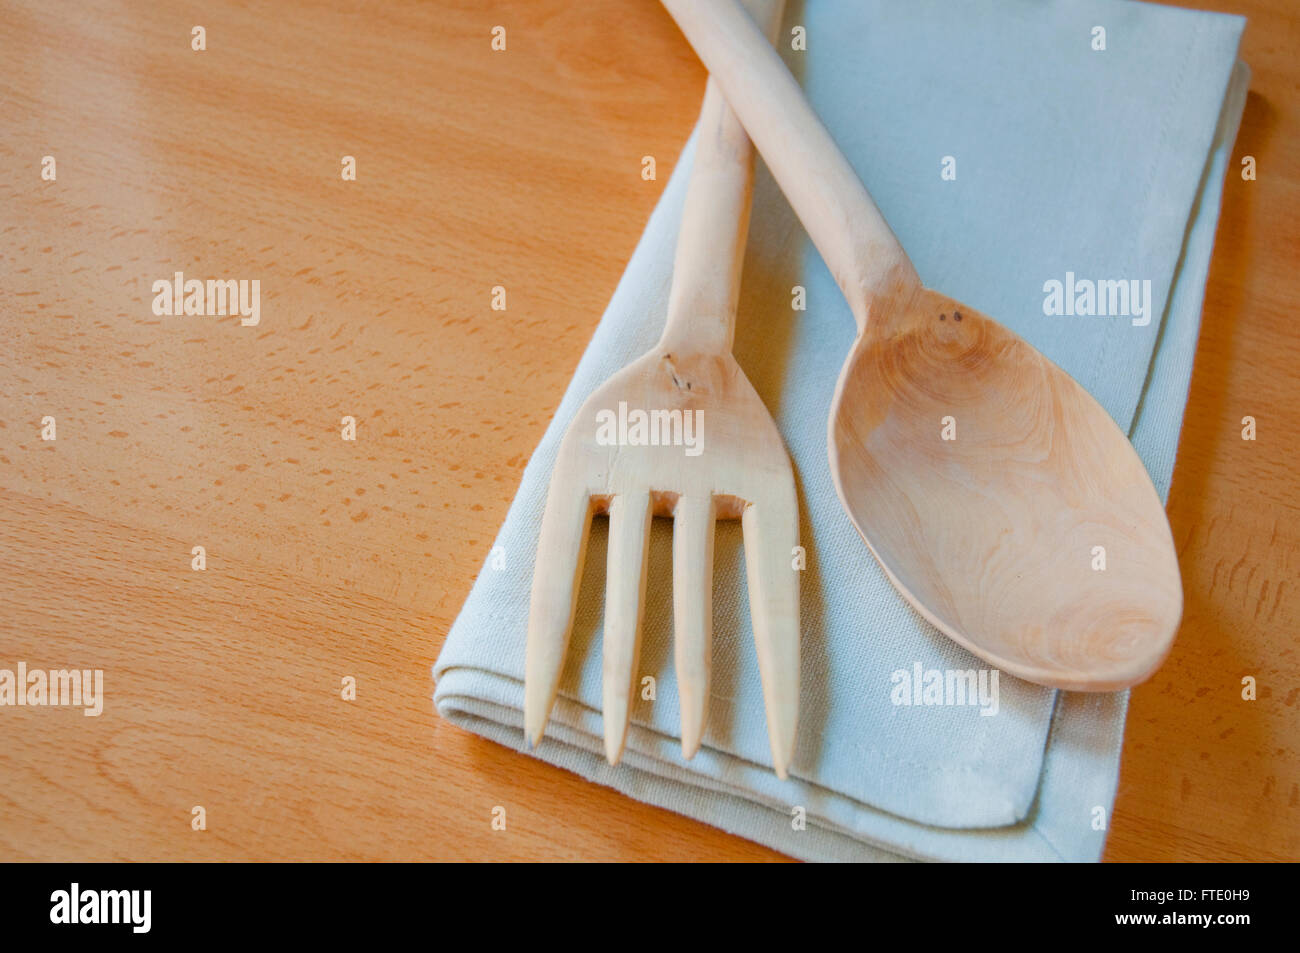 Wooden spoon and fork on napkin. Stock Photo